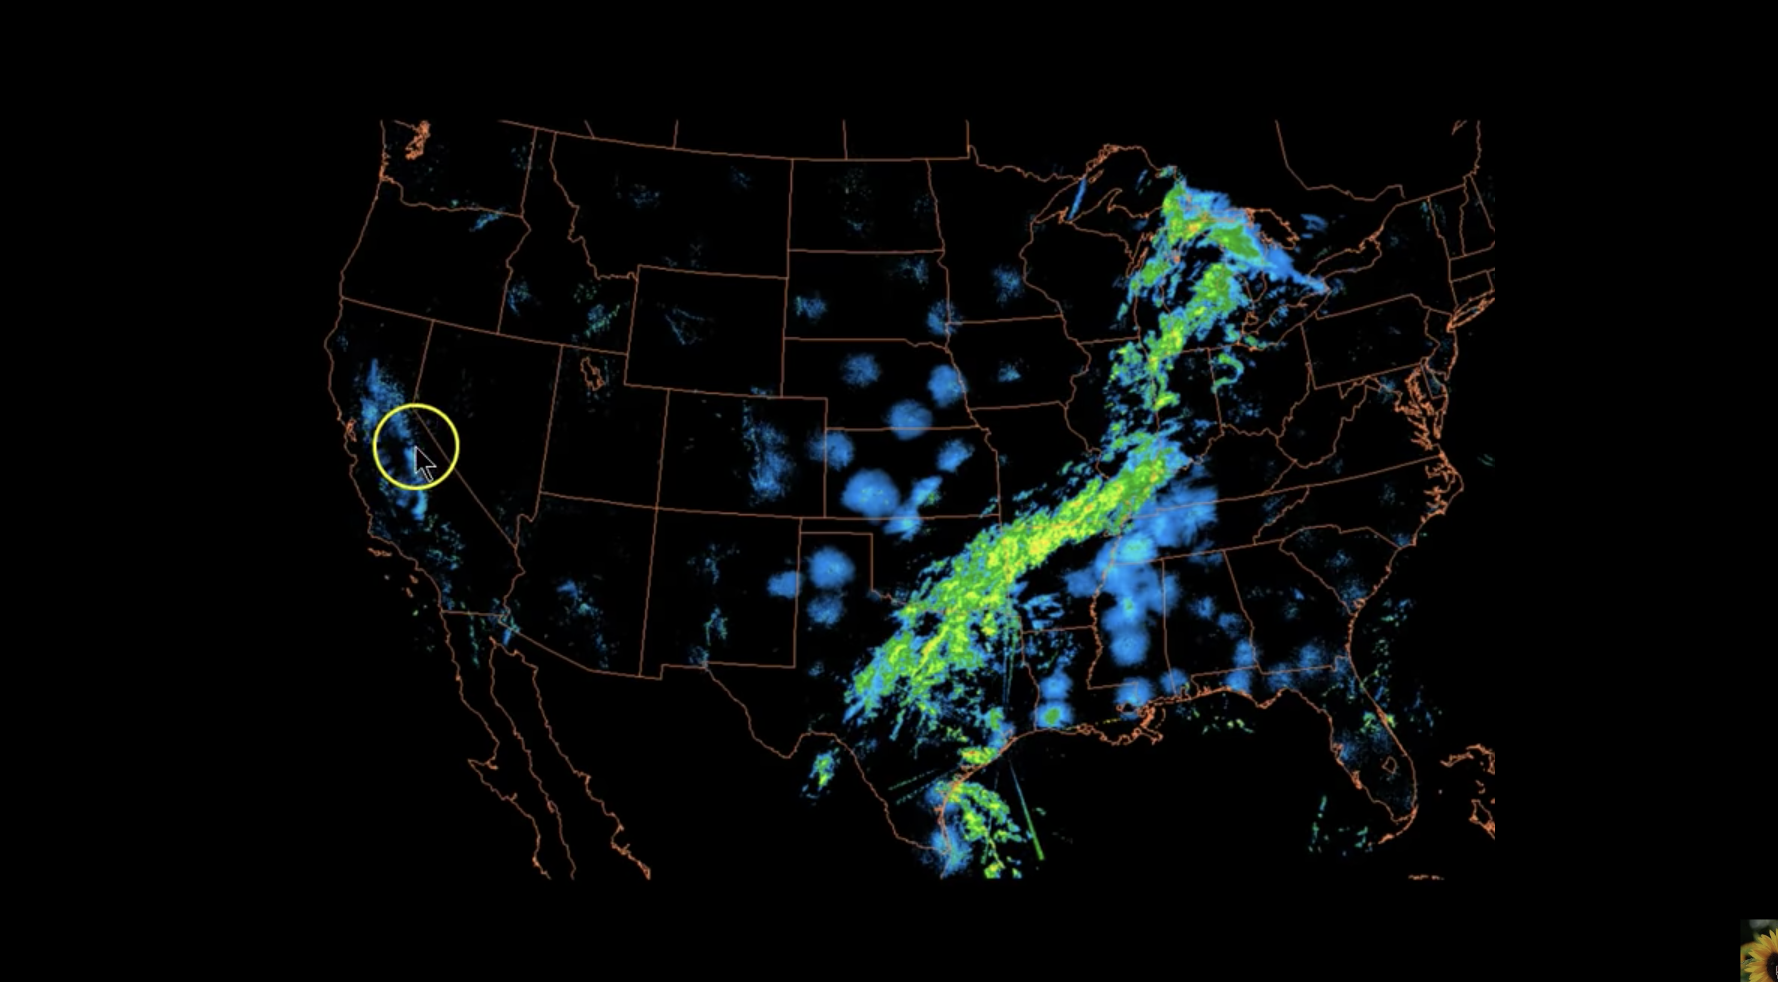 Massive RF Weather Manipulation over South West, USA and beyond. GMO WEATHER!!!